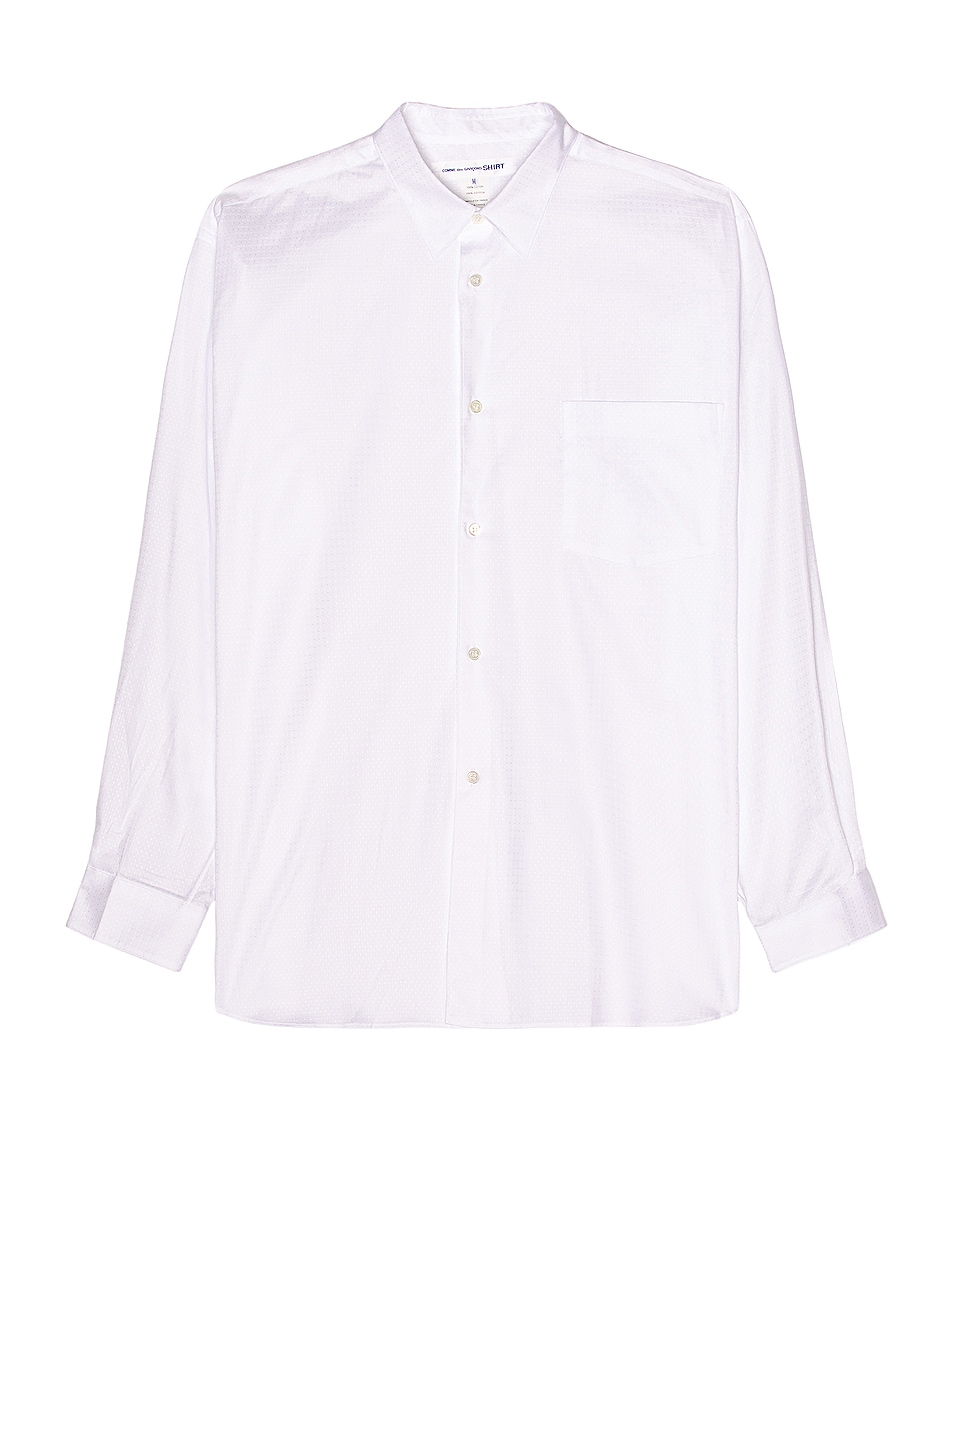 Image 1 of COMME des GARCONS SHIRT Cotton Poplin Shirt in White